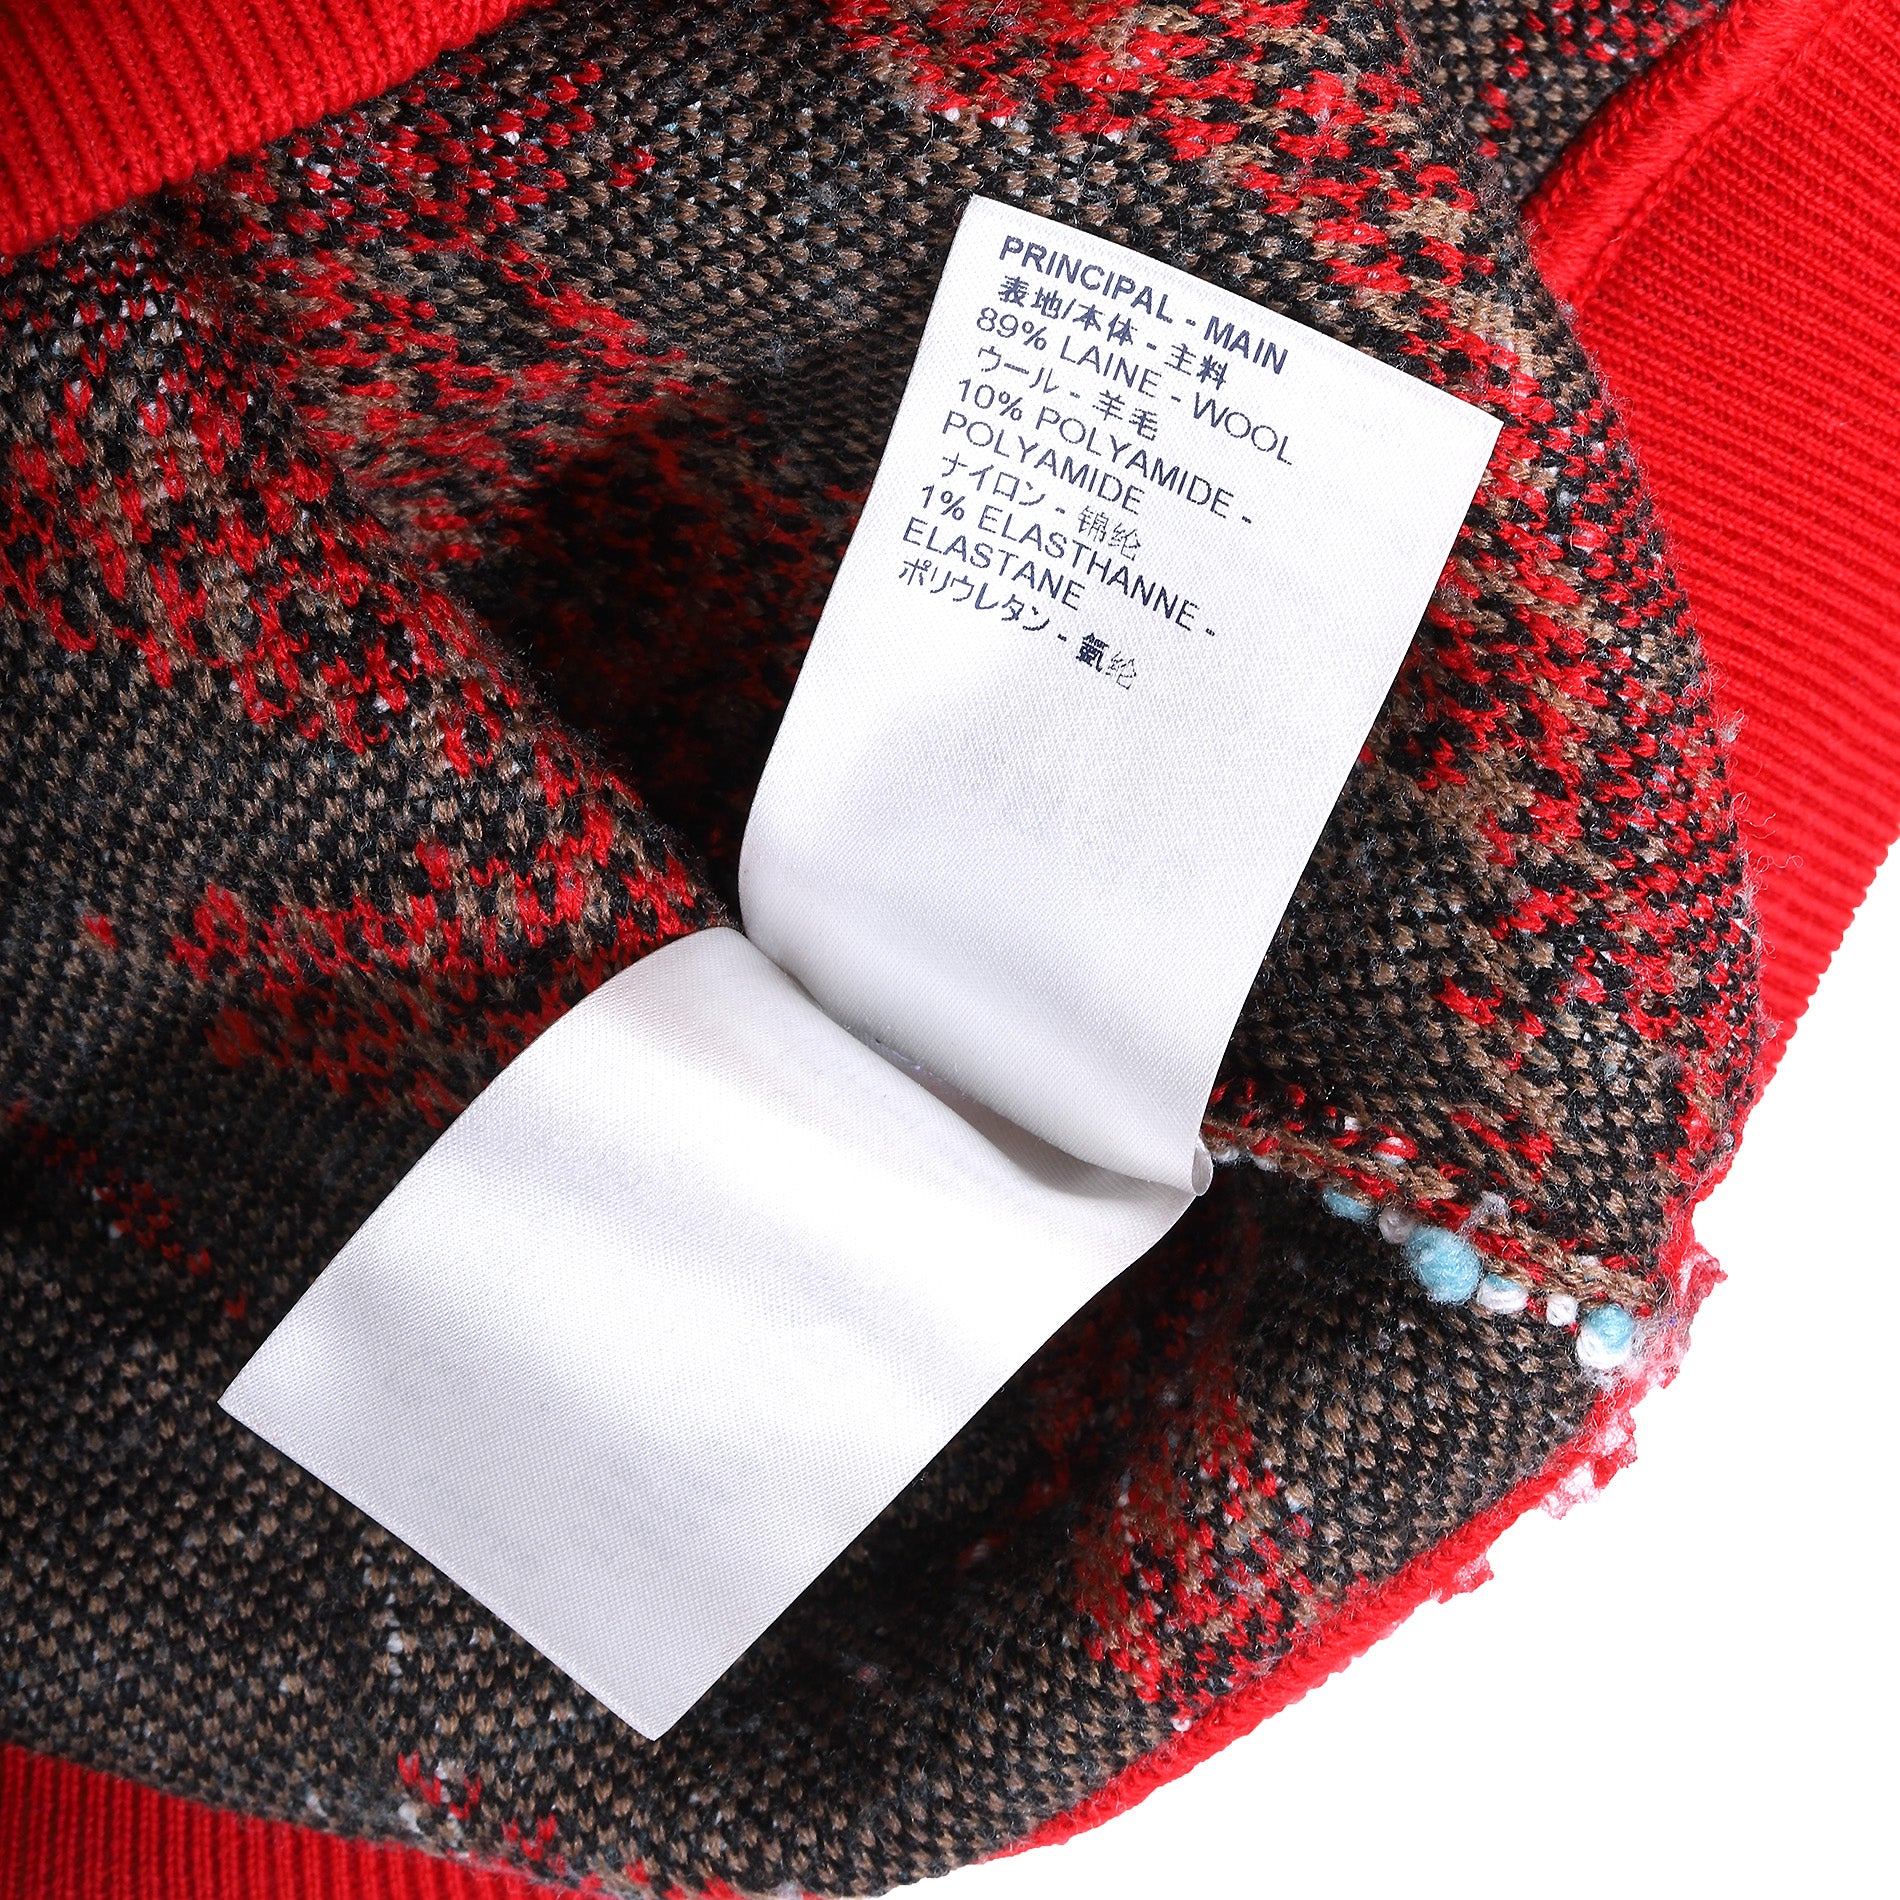 Louis Vuitton Order knit(Red)